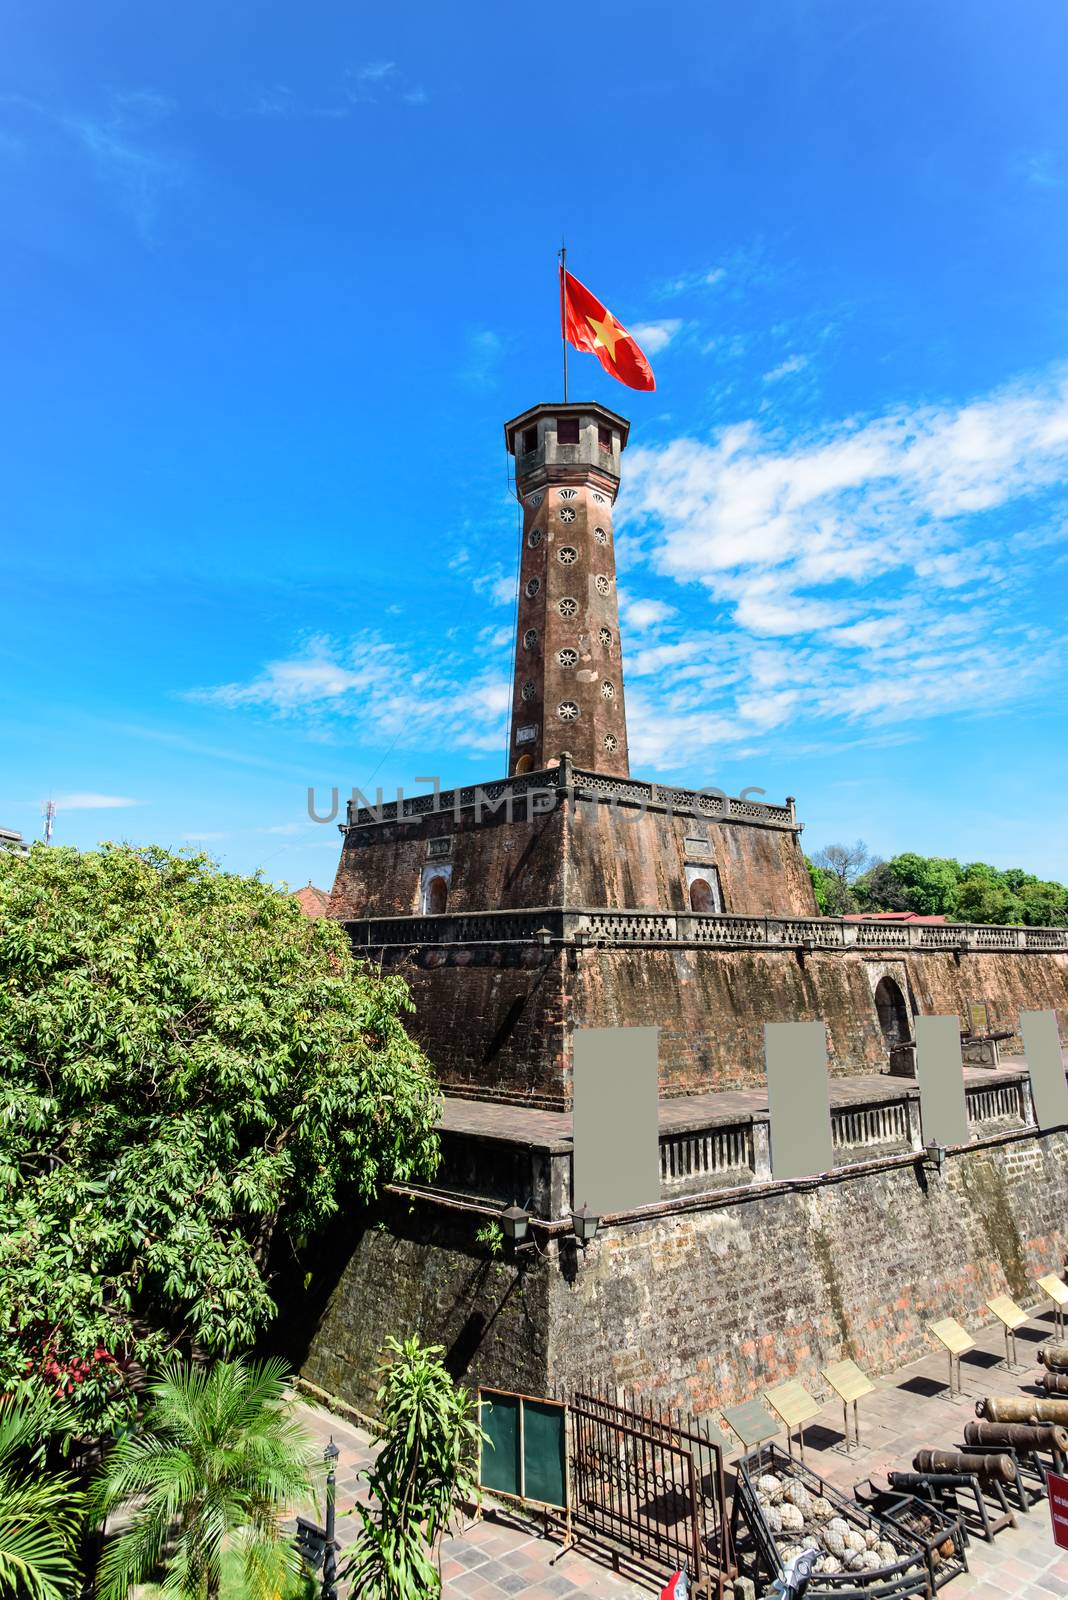 Hanoi flag tower with flying Vietnamese flag and empty standing billboard cloud blue sky by trongnguyen